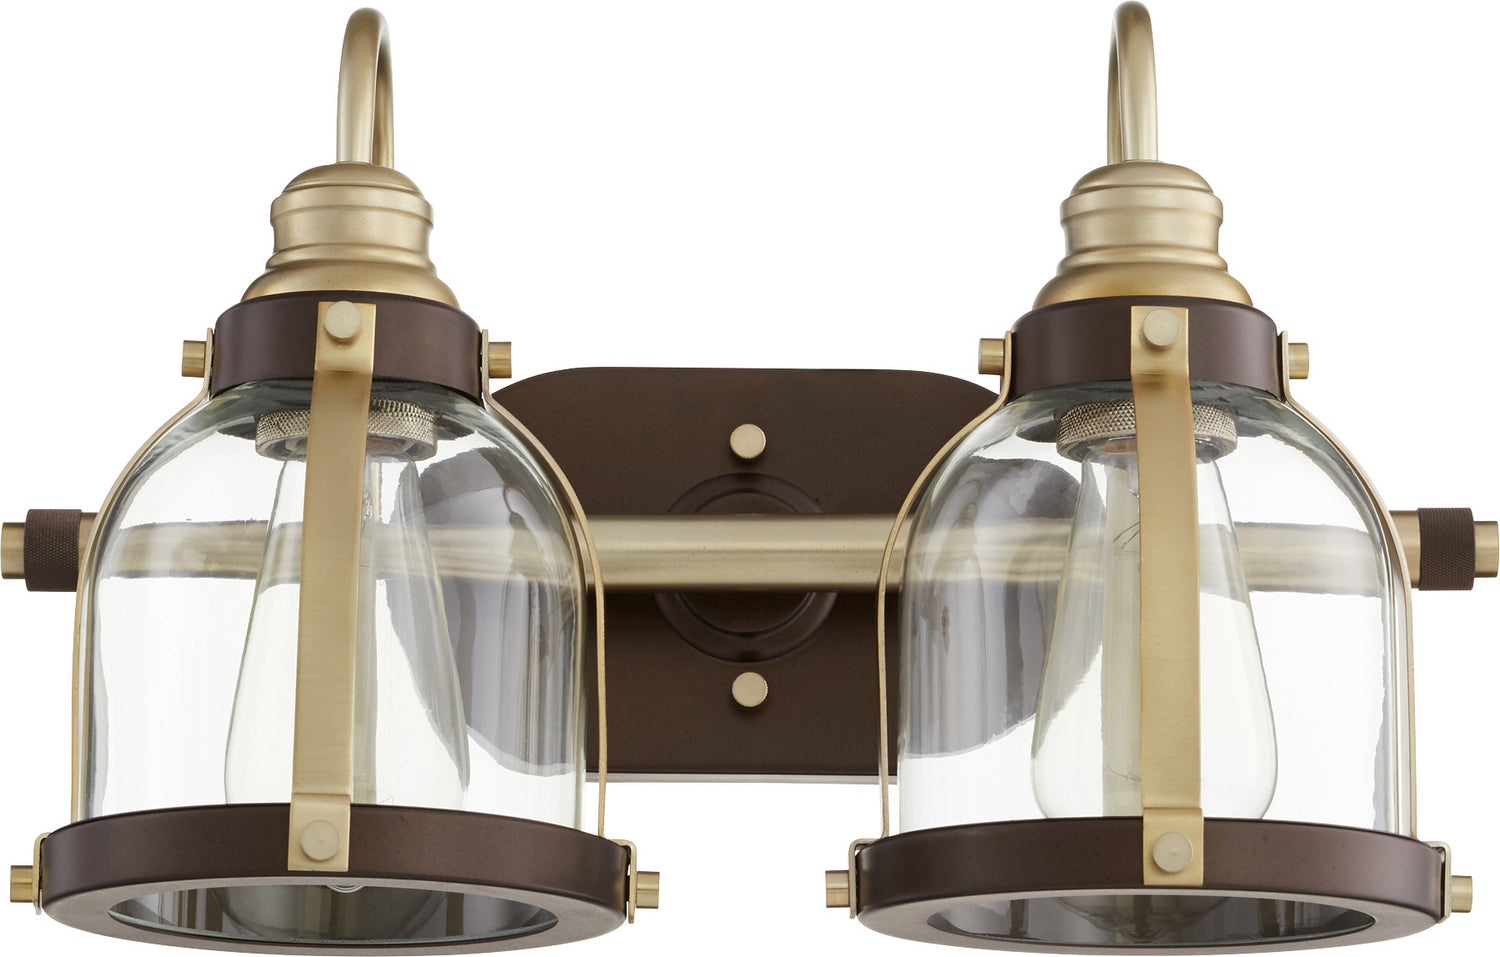 Quorum Banded Series 586-2-8086 Bath Vanity Light 16 in. wide - Aged Brass W/ Oiled Bronze